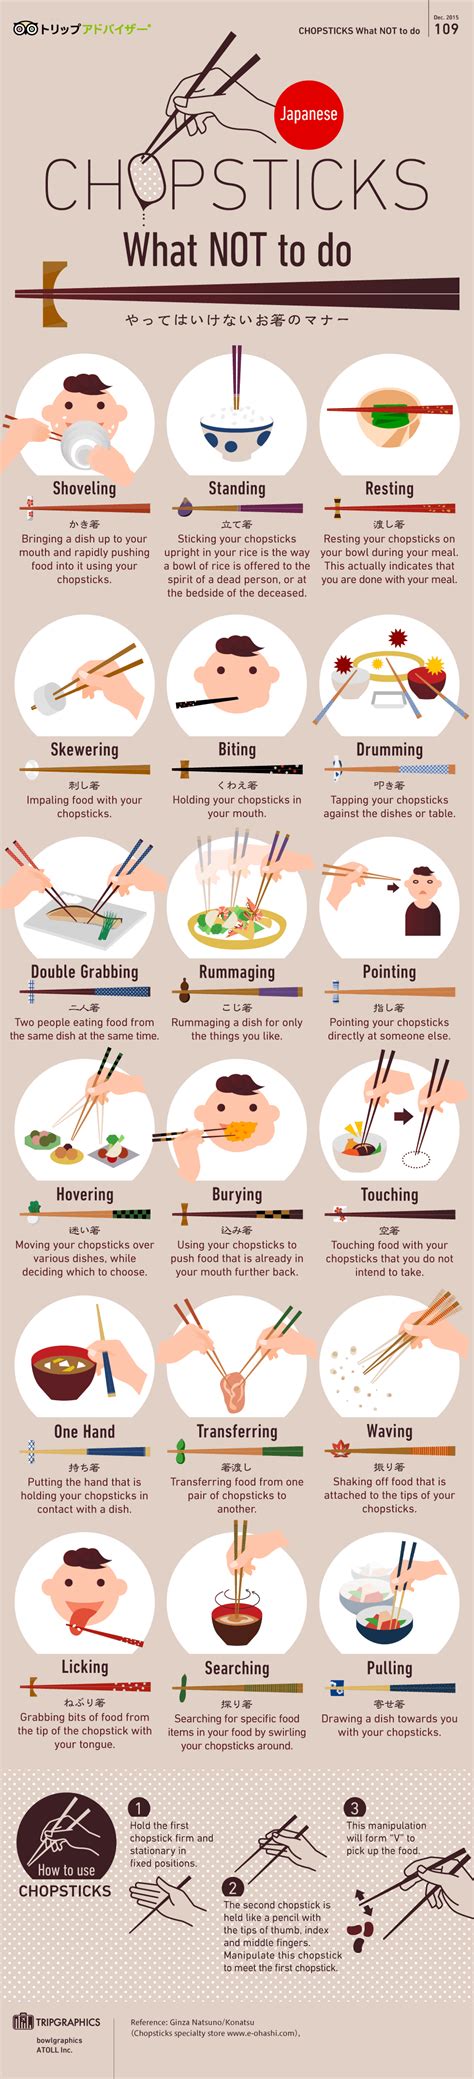 But if you have to have some business dinners. How To Use Chopsticks Without Embarrassing Yourself | Daily Infographic